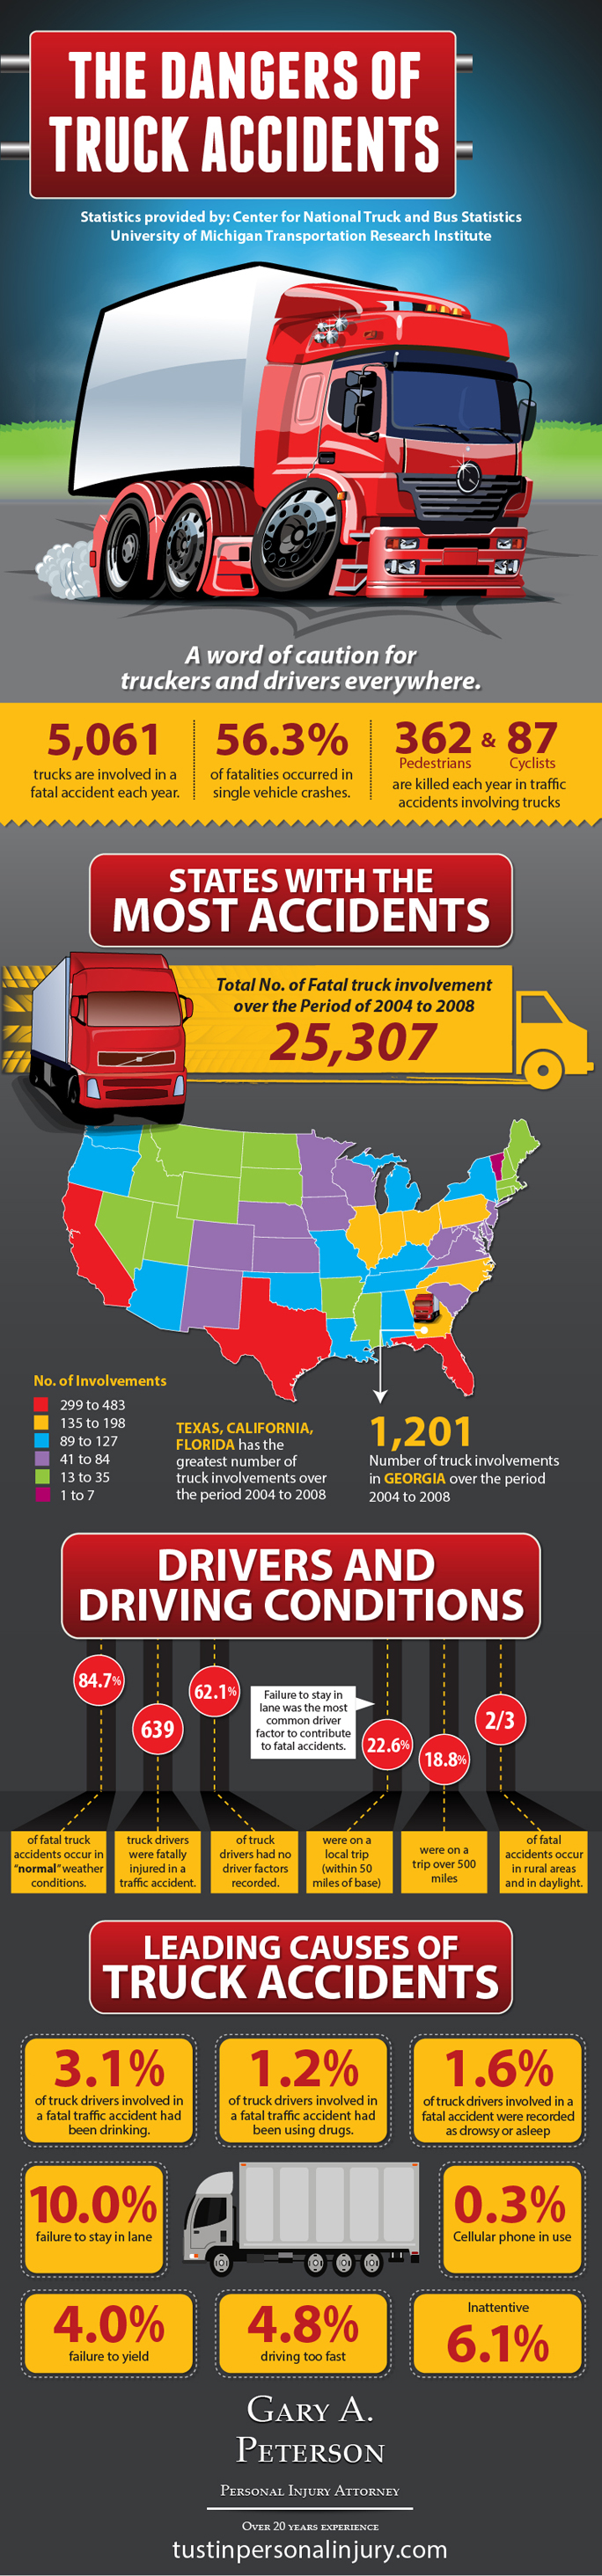 Dangers of Truck Accidents Infographic